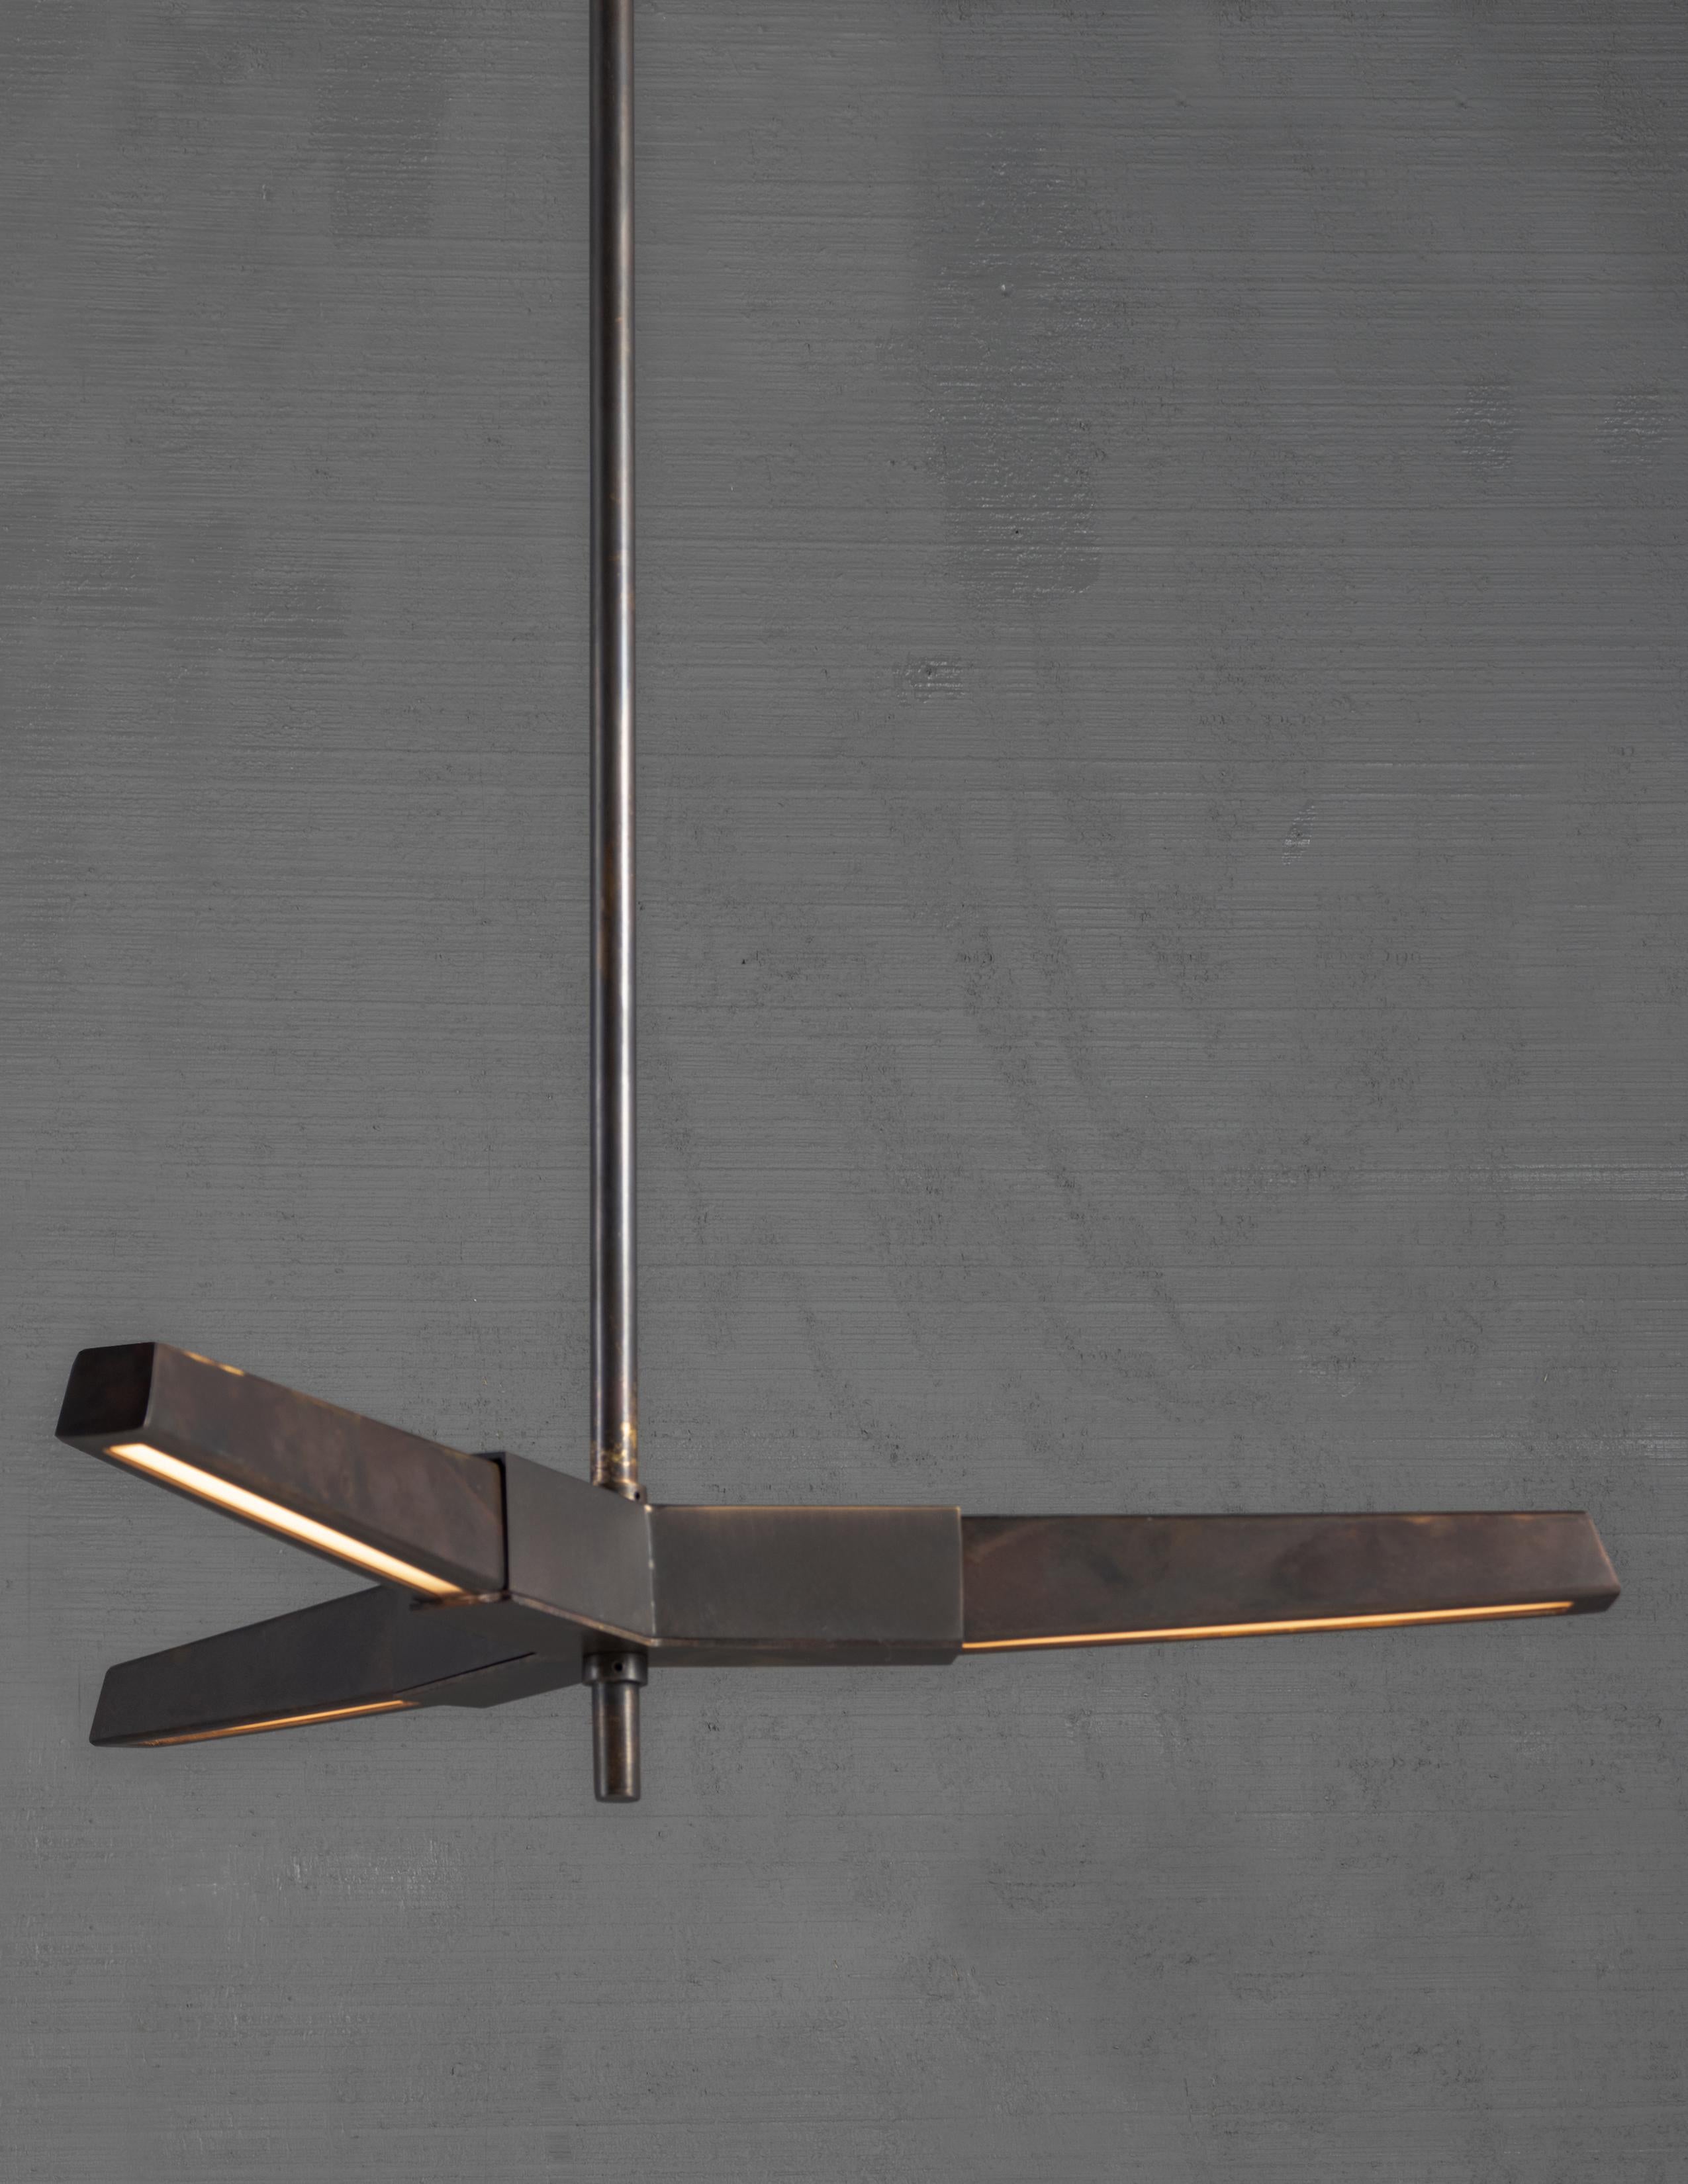 Rustic modern brass and steel cable suspension light

Bulb LED continuous strip. 20 lbs

Handcrafted in Italy. Sold exclusively at Brendan Bass.

Minimum hanging height: N/A
Maximum hanging height: 62.3